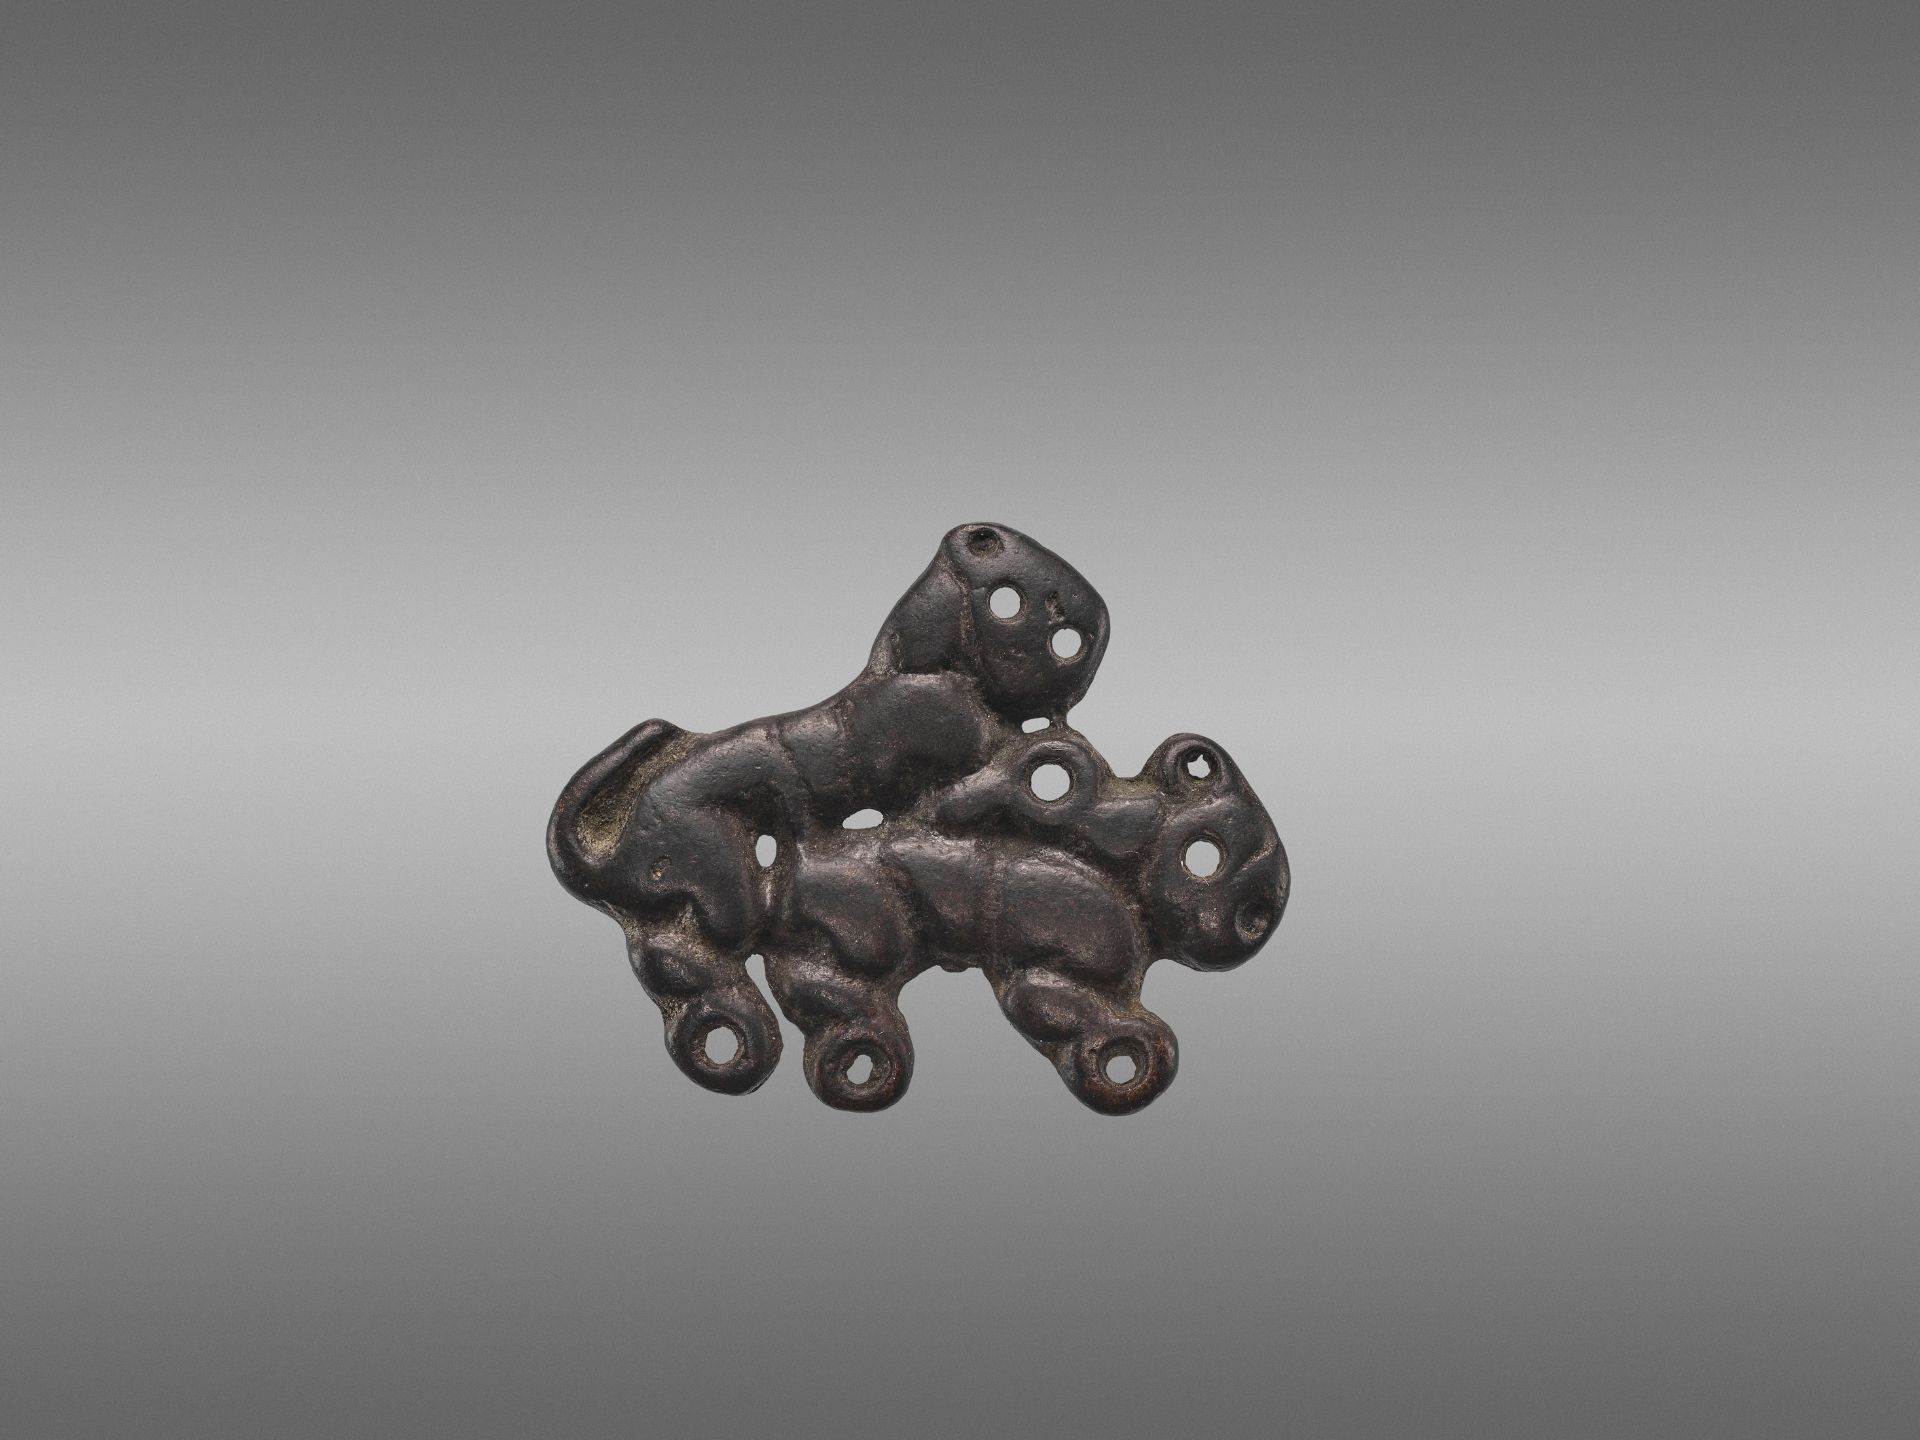 AN ORDOS BRONZE 'COPULATING TIGERS' PLAQUE, WARRING STATES